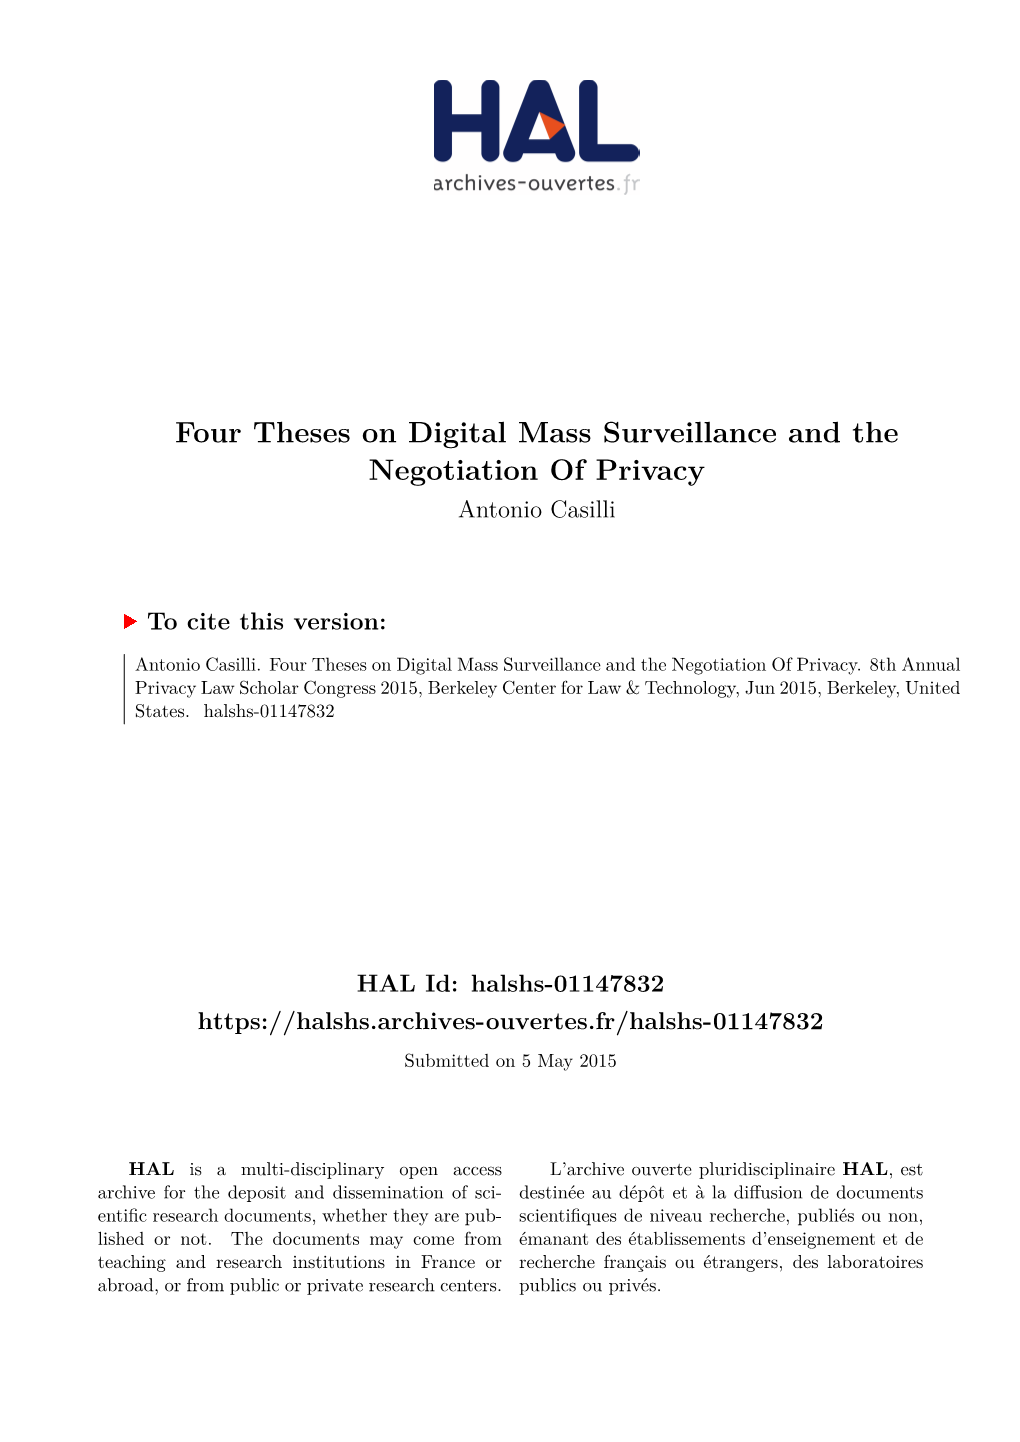 Four Theses on Digital Mass Surveillance and the Negotiation of Privacy Antonio Casilli